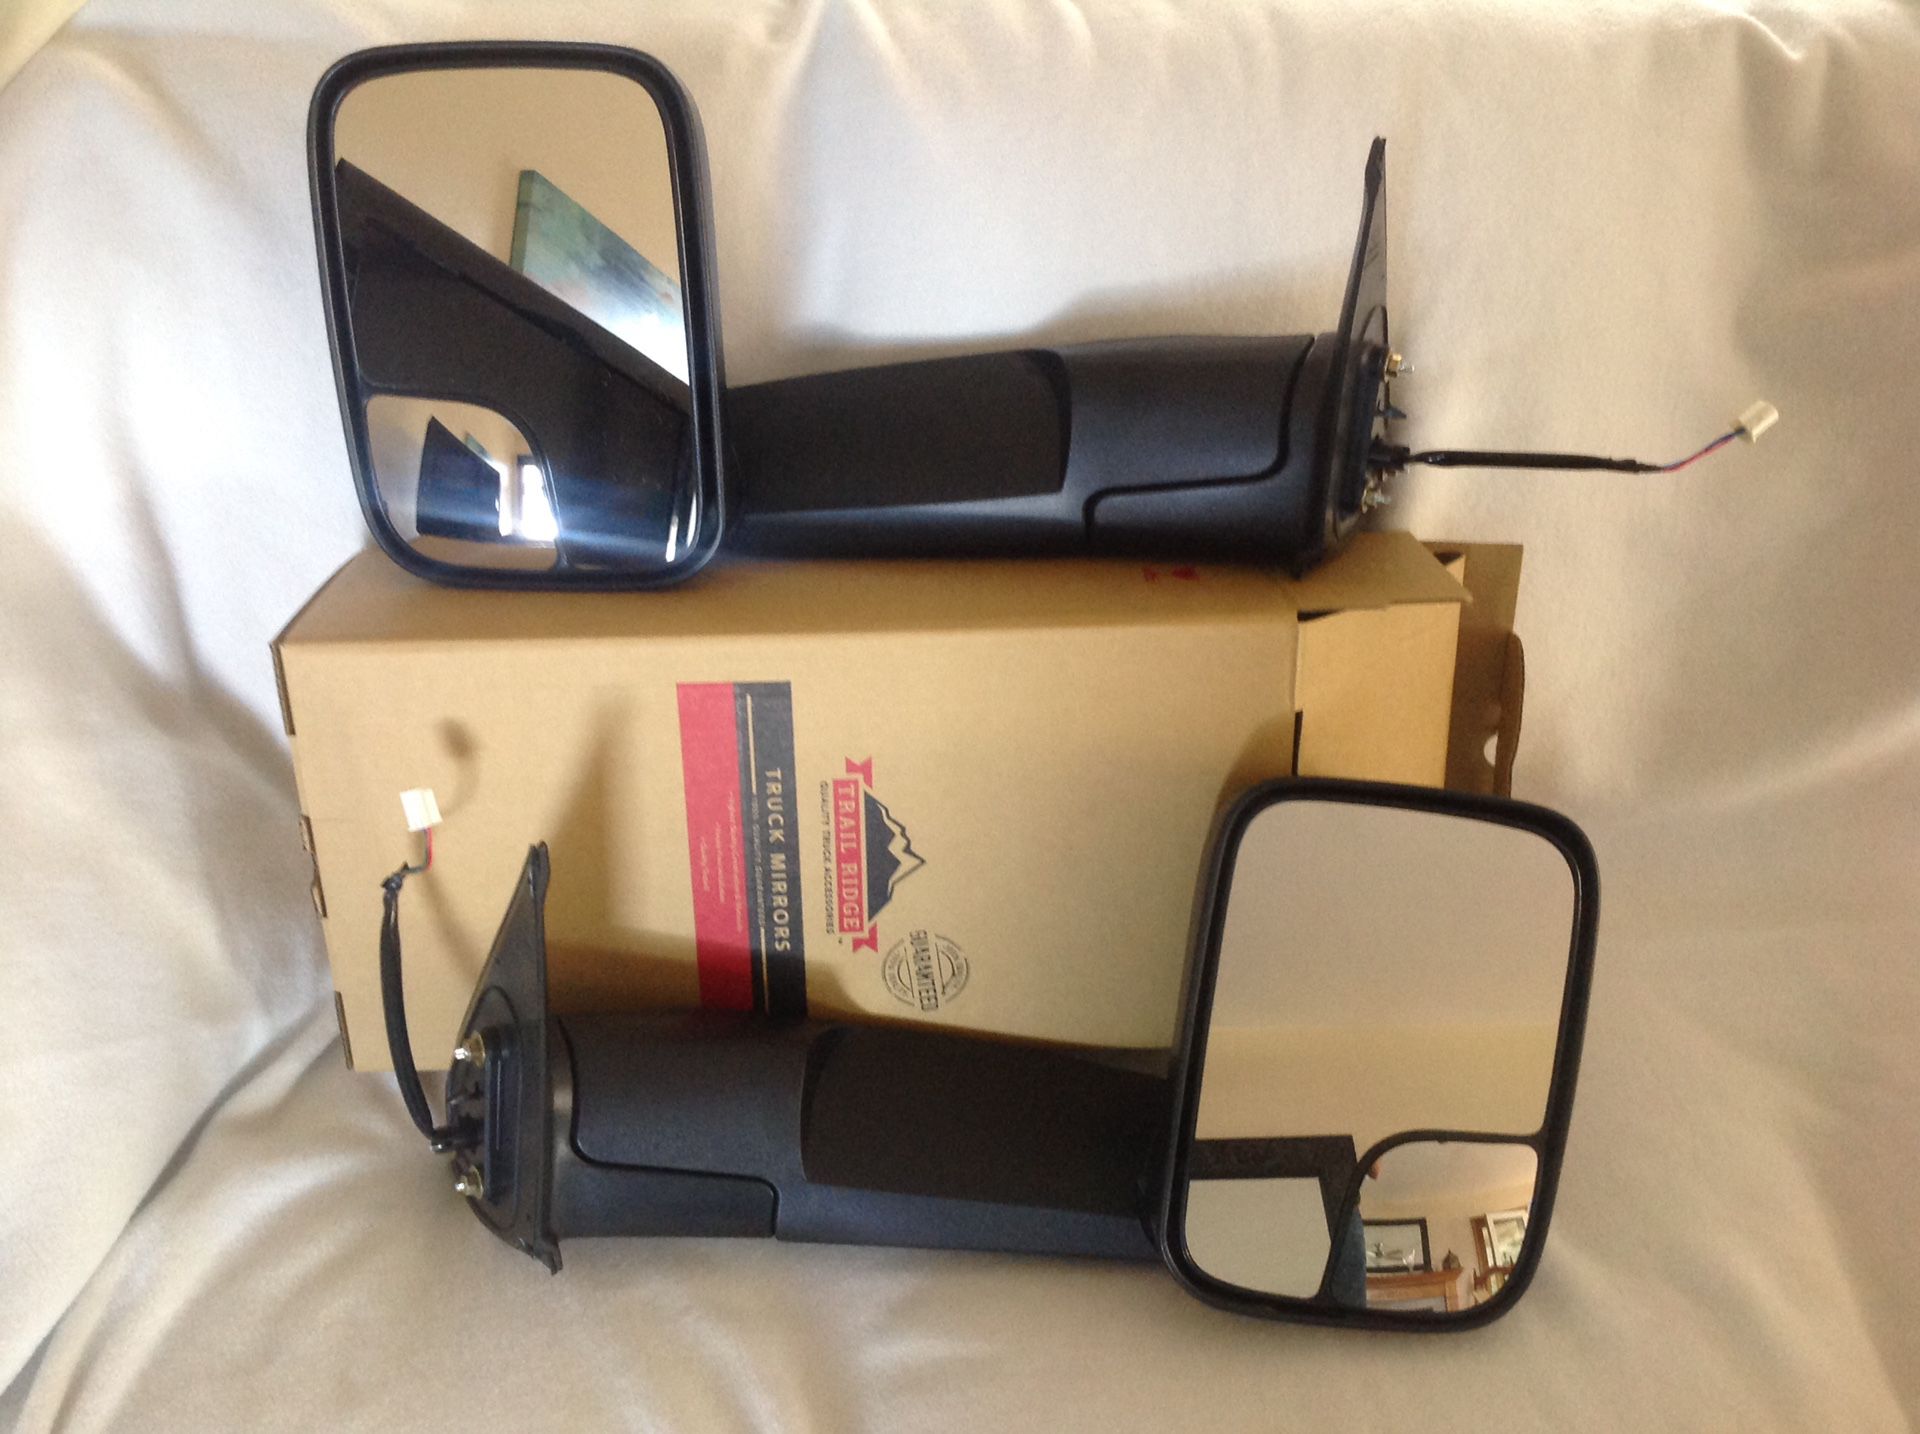 Timber Ridge folding power towing mirrors. New in the box.